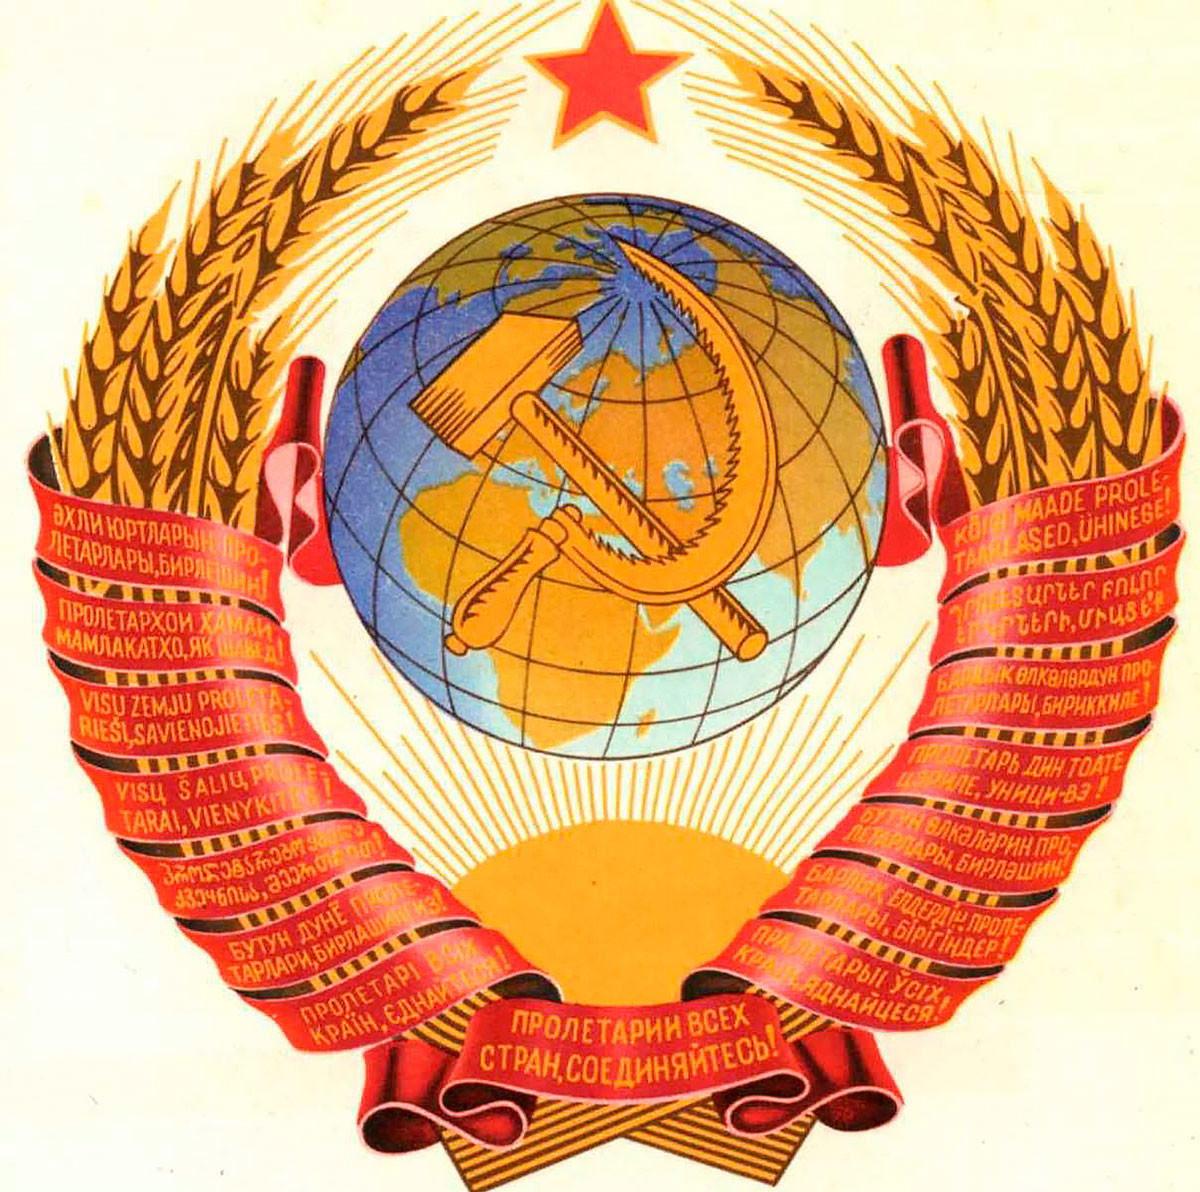 The emblem of the USSR.